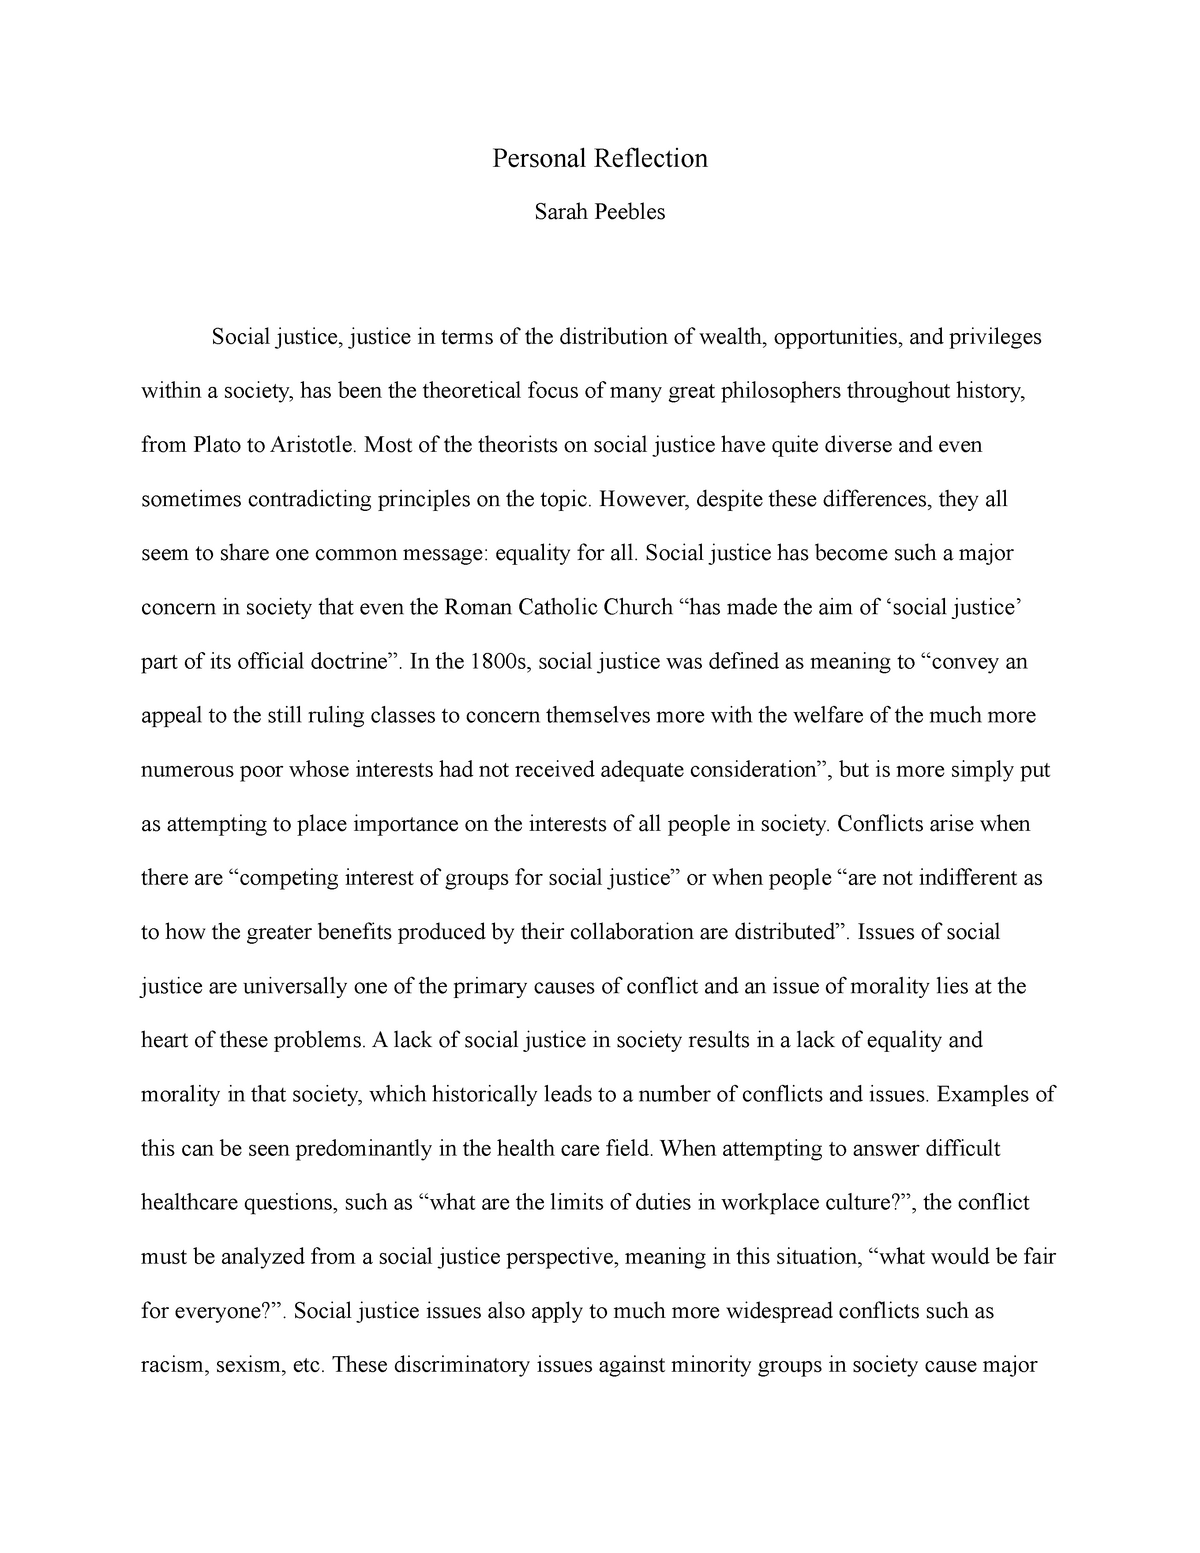 synthesis essay on social justice